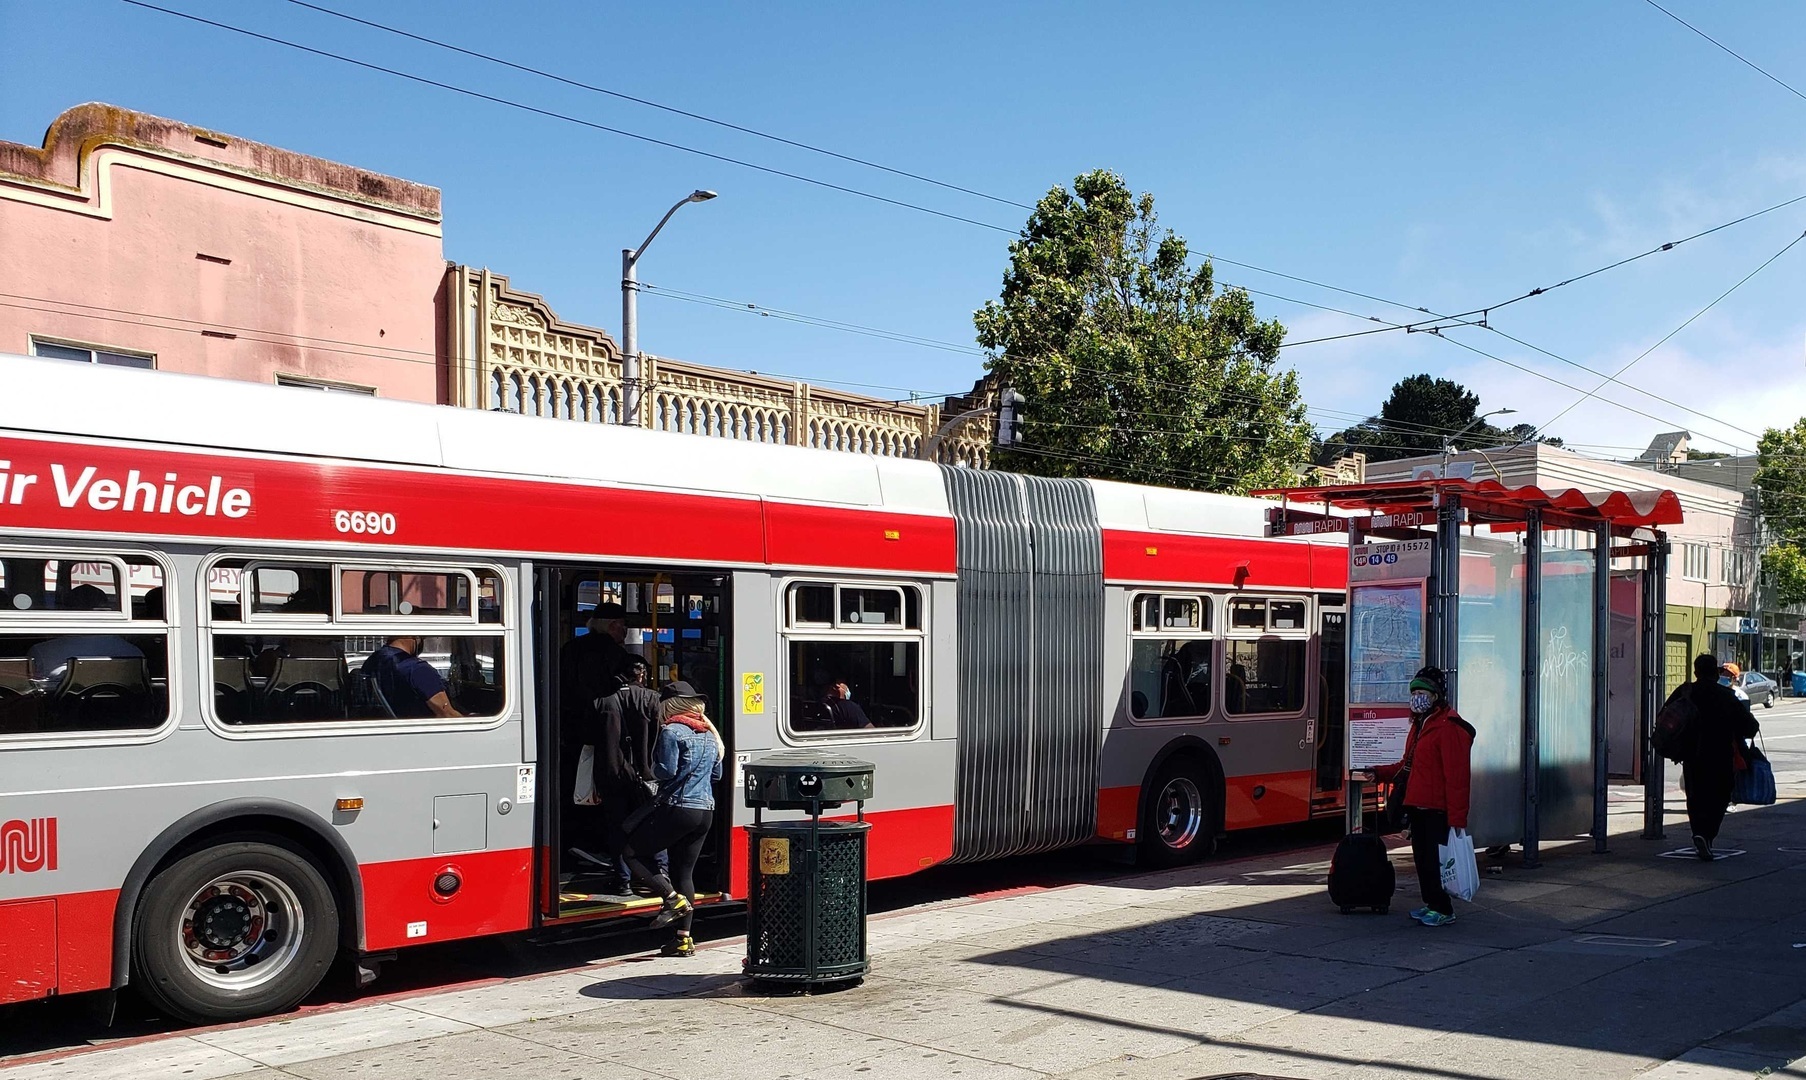 Transit Matters: From COVID Recovery to World-Class Transit for All, San Francisco, California, United States